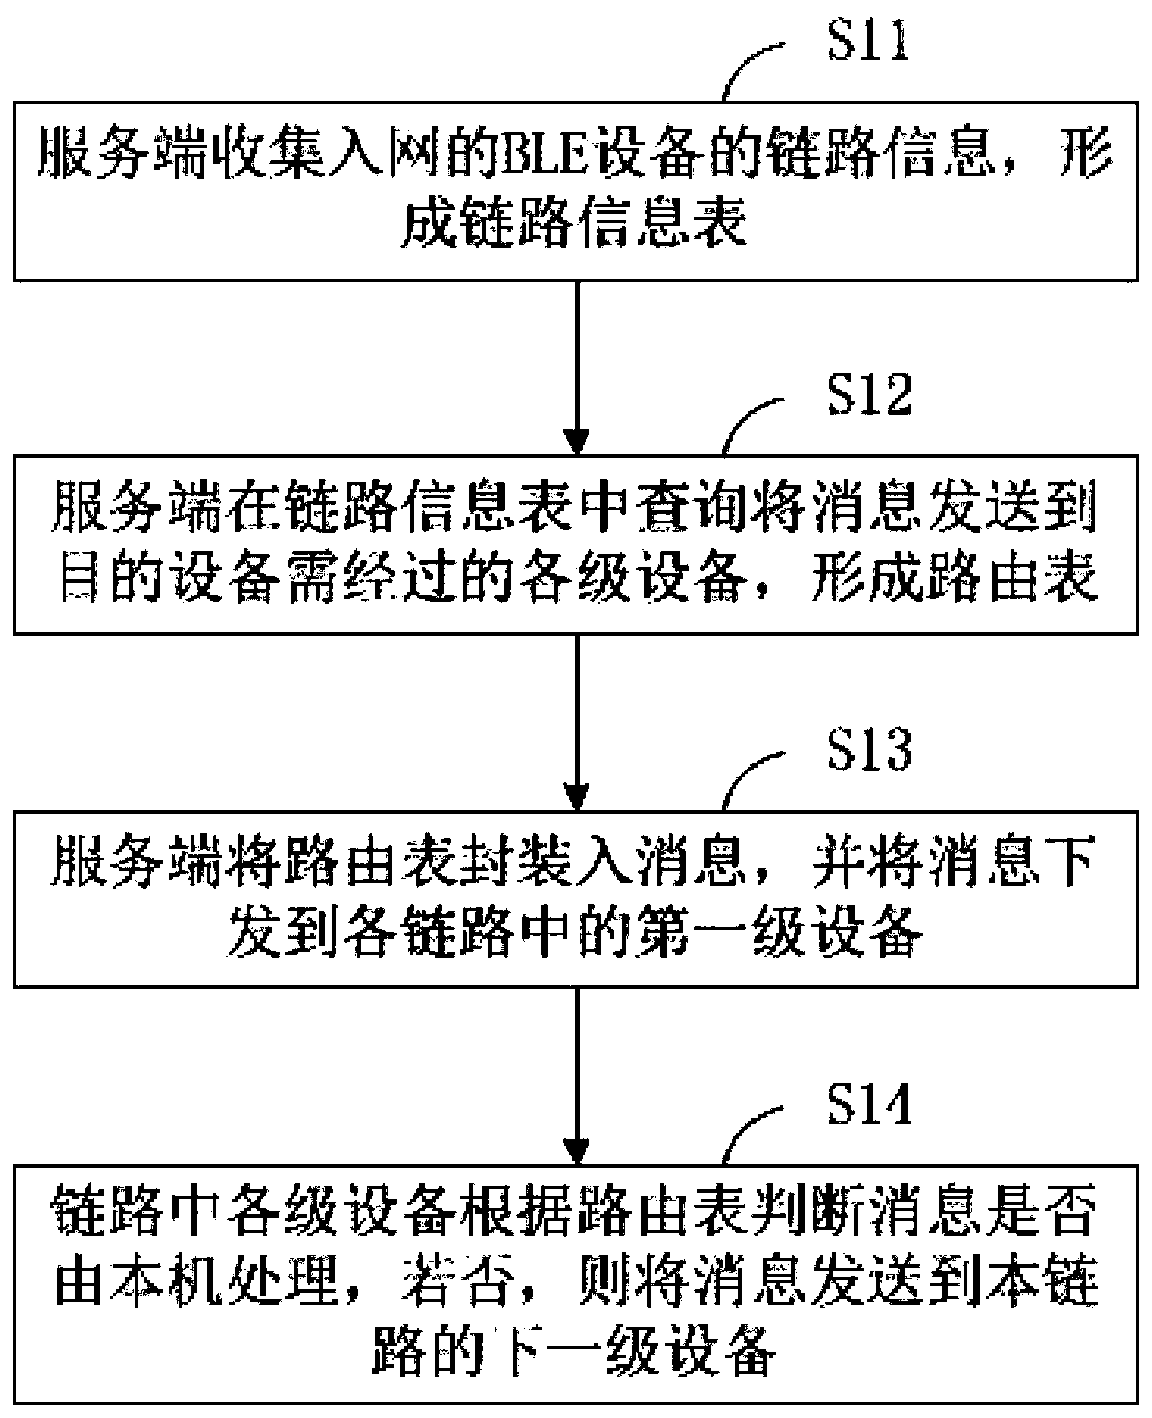 BLE cascade network and link routing method and device thereof